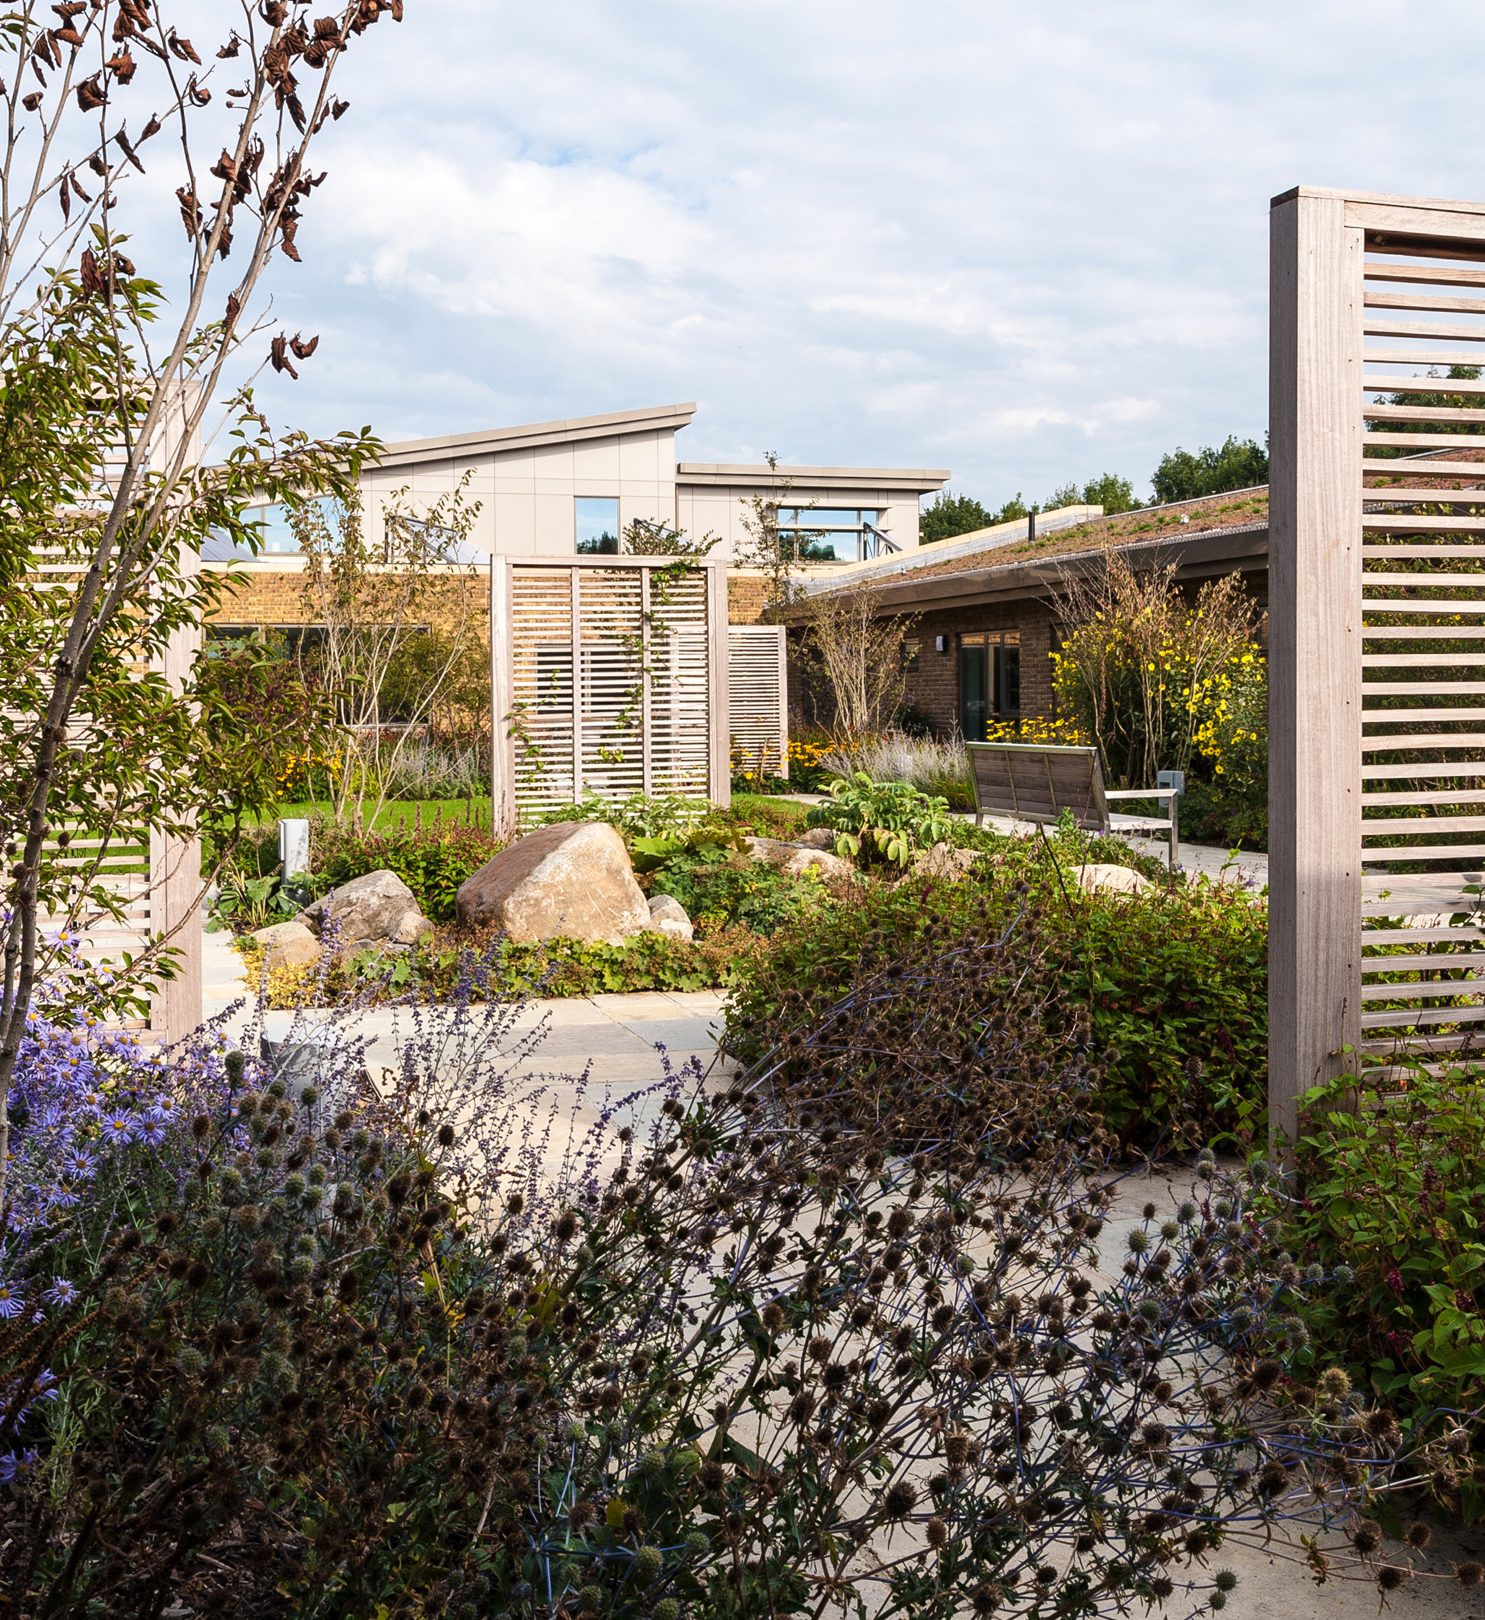 Healthcare Design & Management Features St Wilfrid’s Hospice